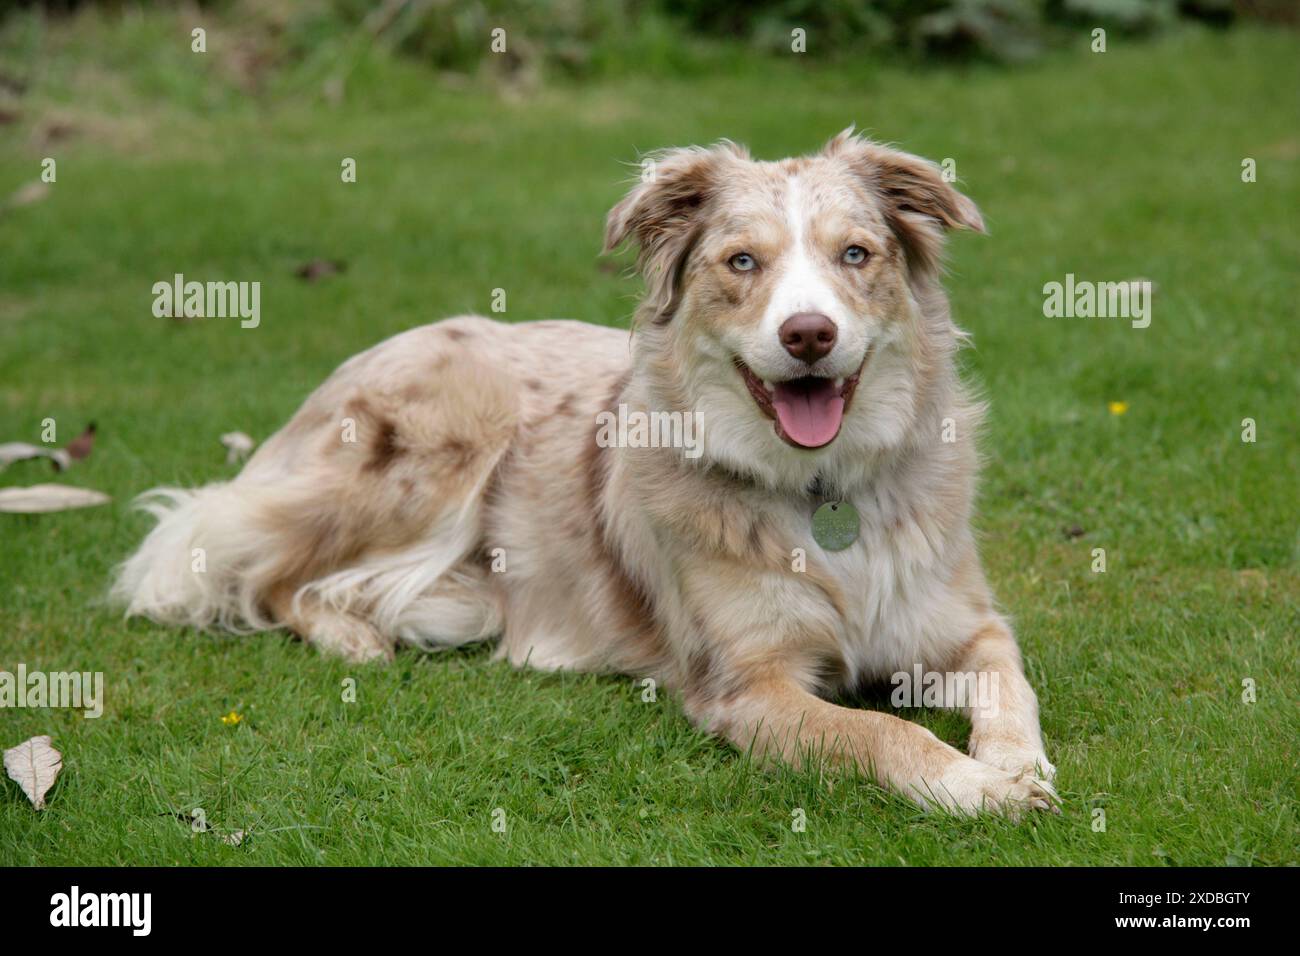 DOG - Lying on grass with mouth open. Stock Photo